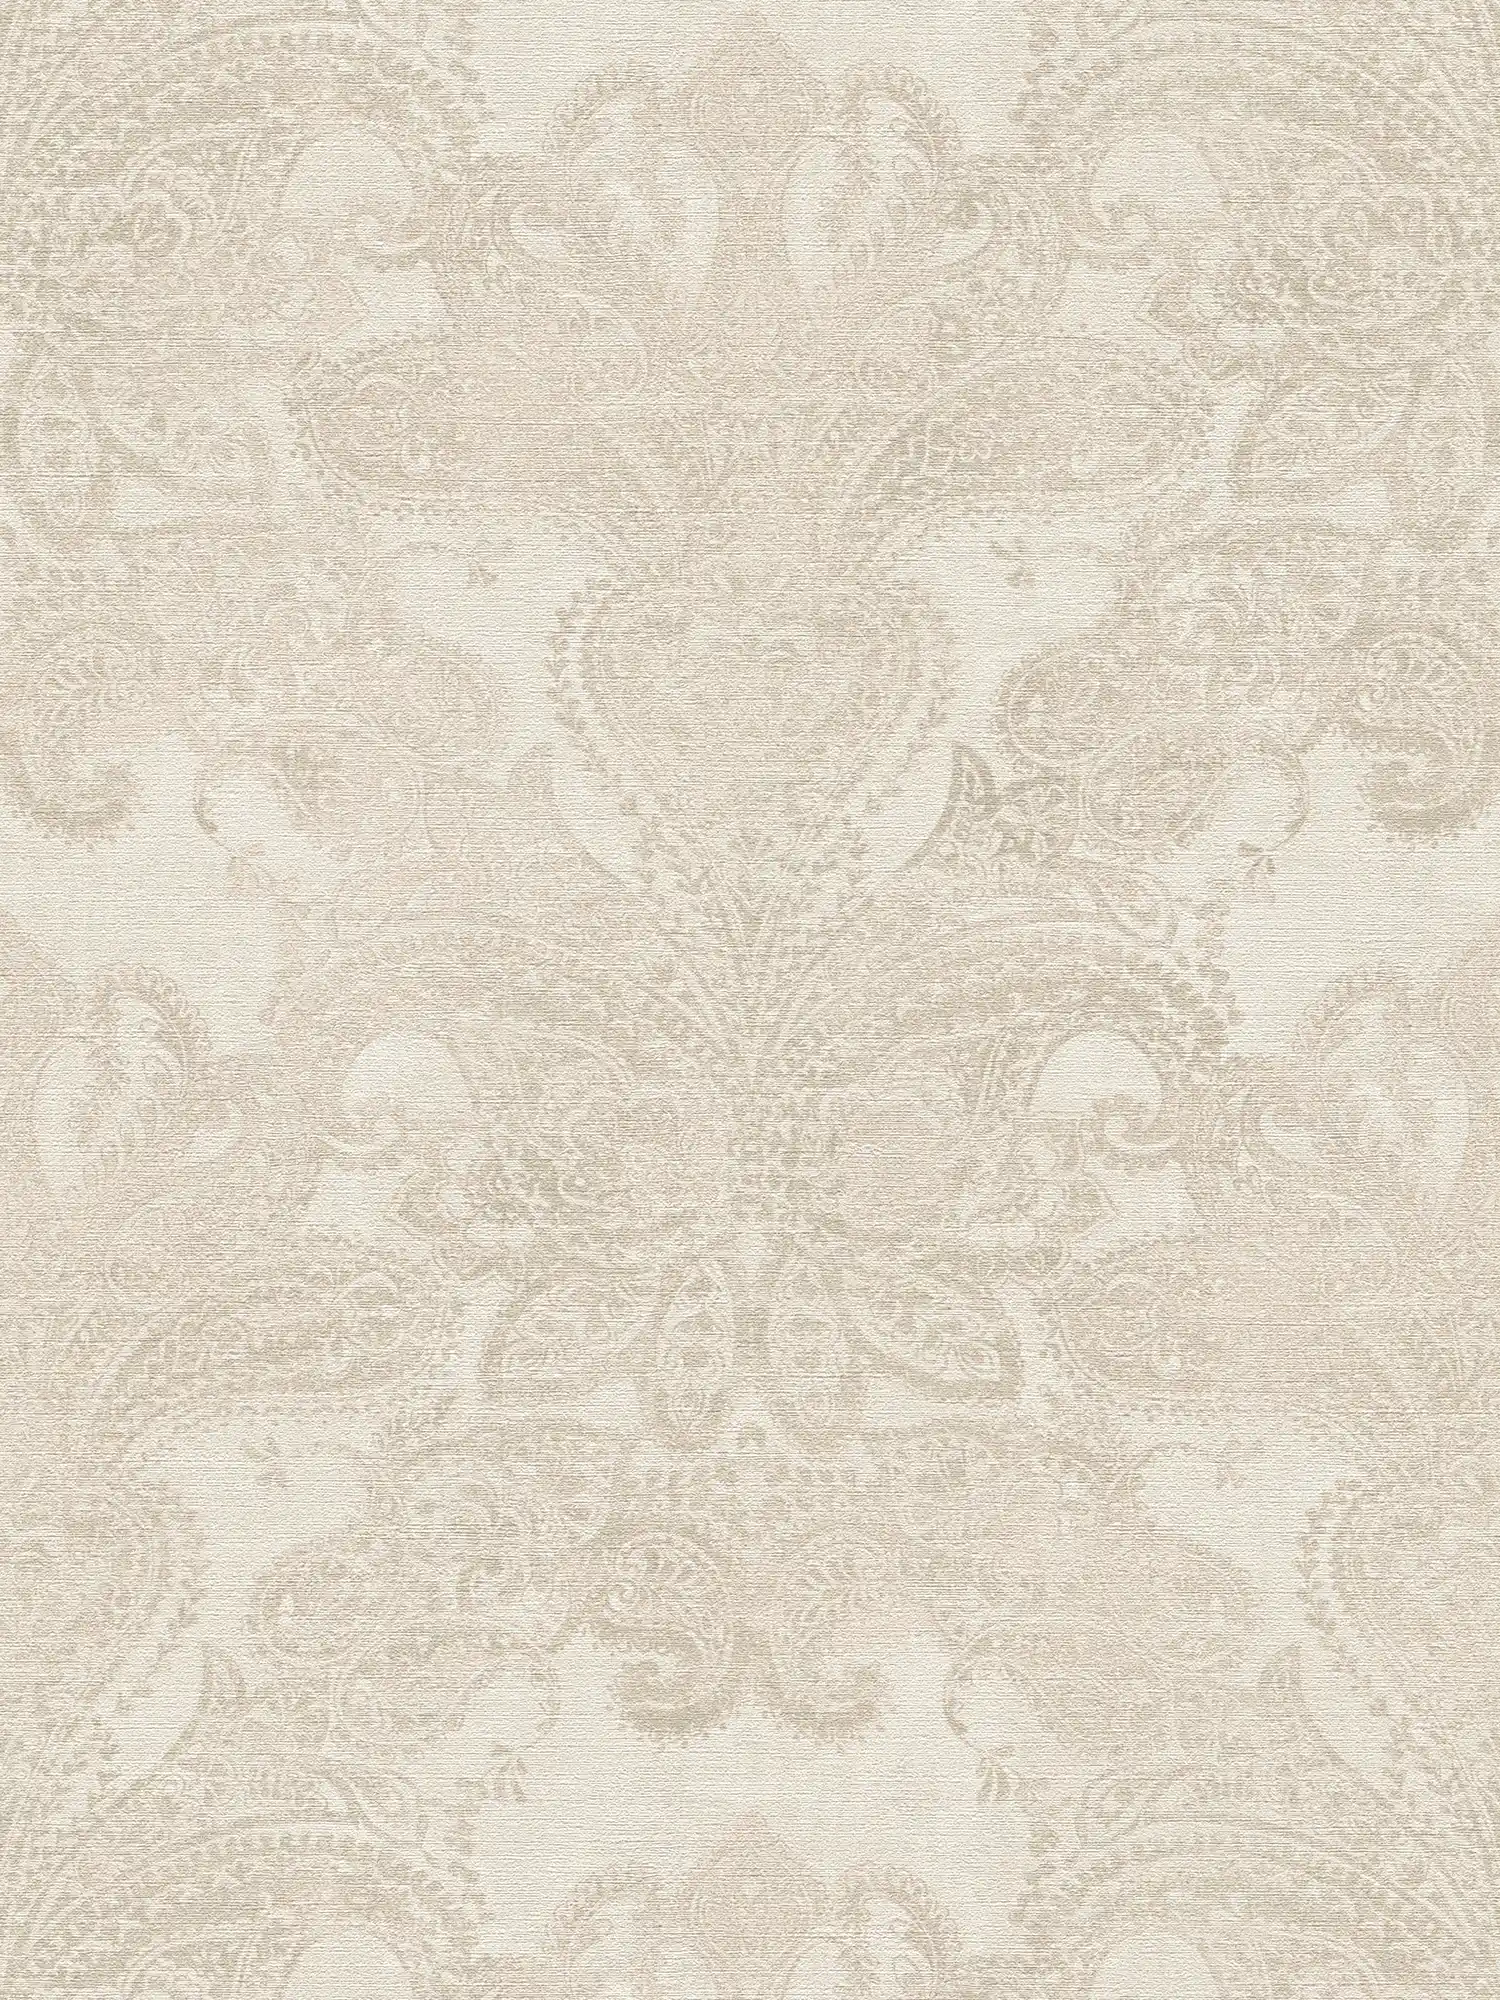 Baroque wallpaper with large ornaments - white, cream, grey
